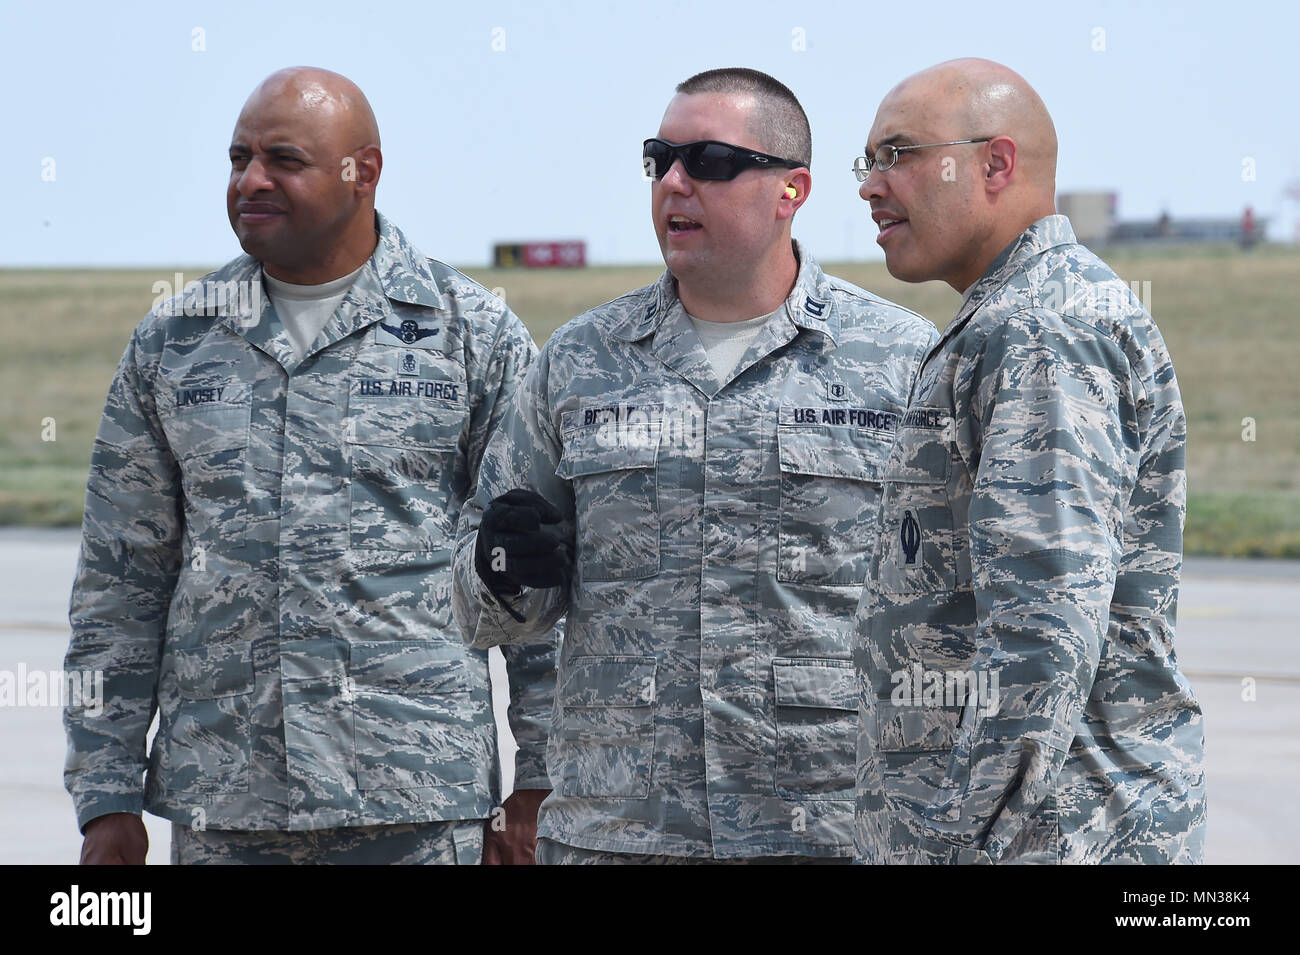 Col. David Miller Jr., 460th Space Wing commander, and Chief Master Sgt. Rodney Lindsey, 460th Space Wing command chief, visit the flight line on Buckley Air Force Base, Colo., in order to give encouragement to the men and women prepping aircraft that will bring supplies to those in need after Hurricane Harvey Aug. 30, 2017. Medical supplies were loaded into two C-17’s from the 105th Airlift Wing out of Stewart National Guard Base in New York, that will help those affected by Harvey. (U.S. Air Force photo by Senior Airman Luke W. Nowakowski/Released) Stock Photo